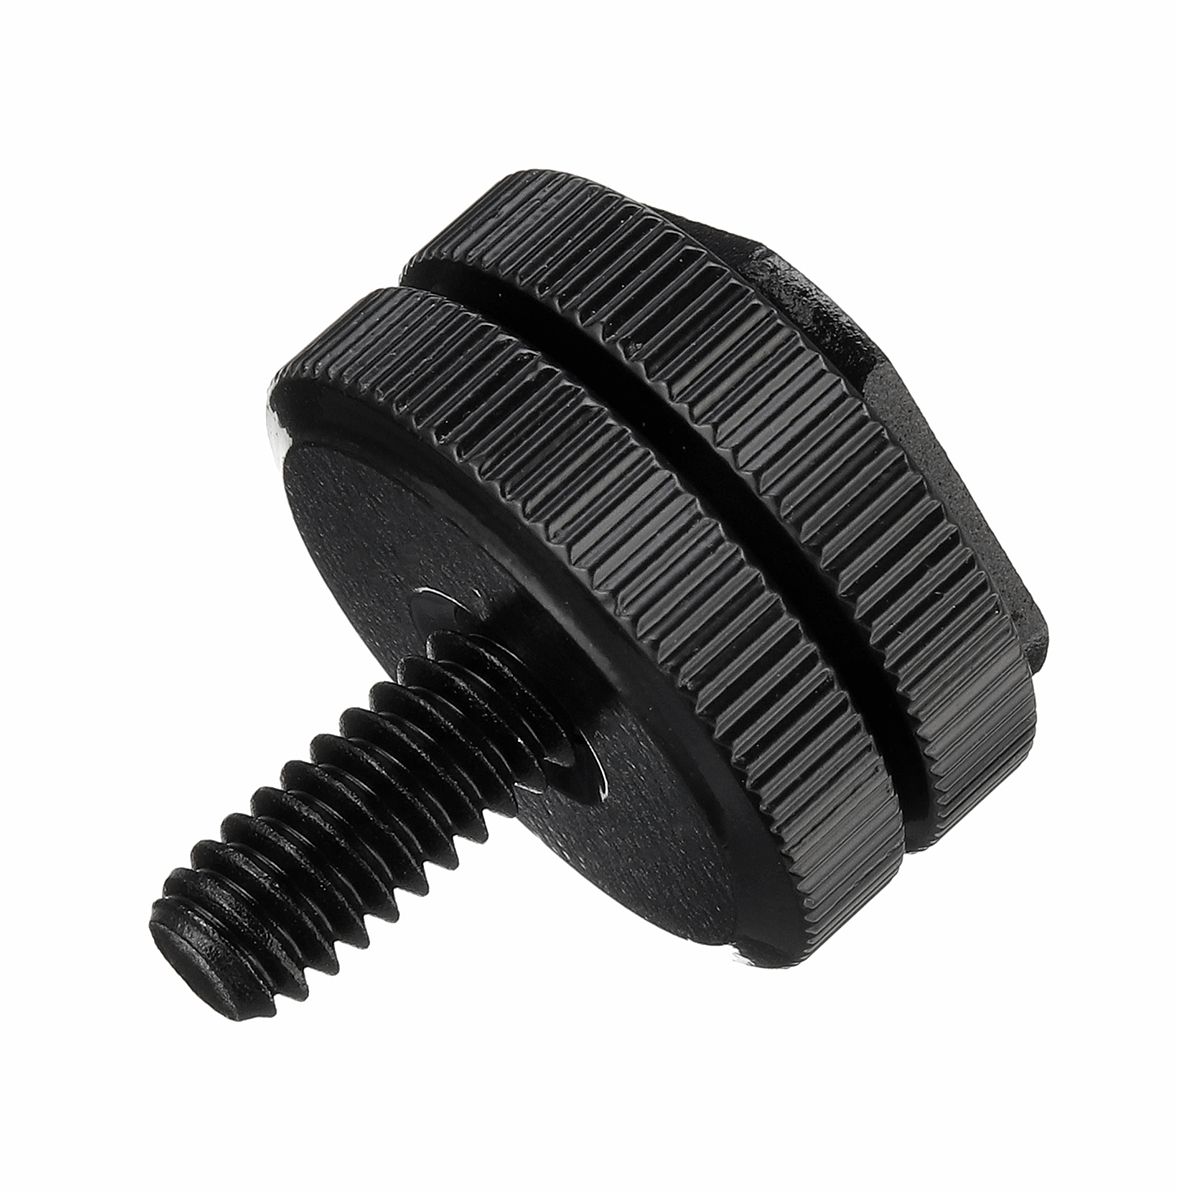 14-Inch-Dual-Thumb-Screw-Flash-Cold-Hot-Shoe-Camera-Adapter-Mount-for-GoPro-DSLR-1426183